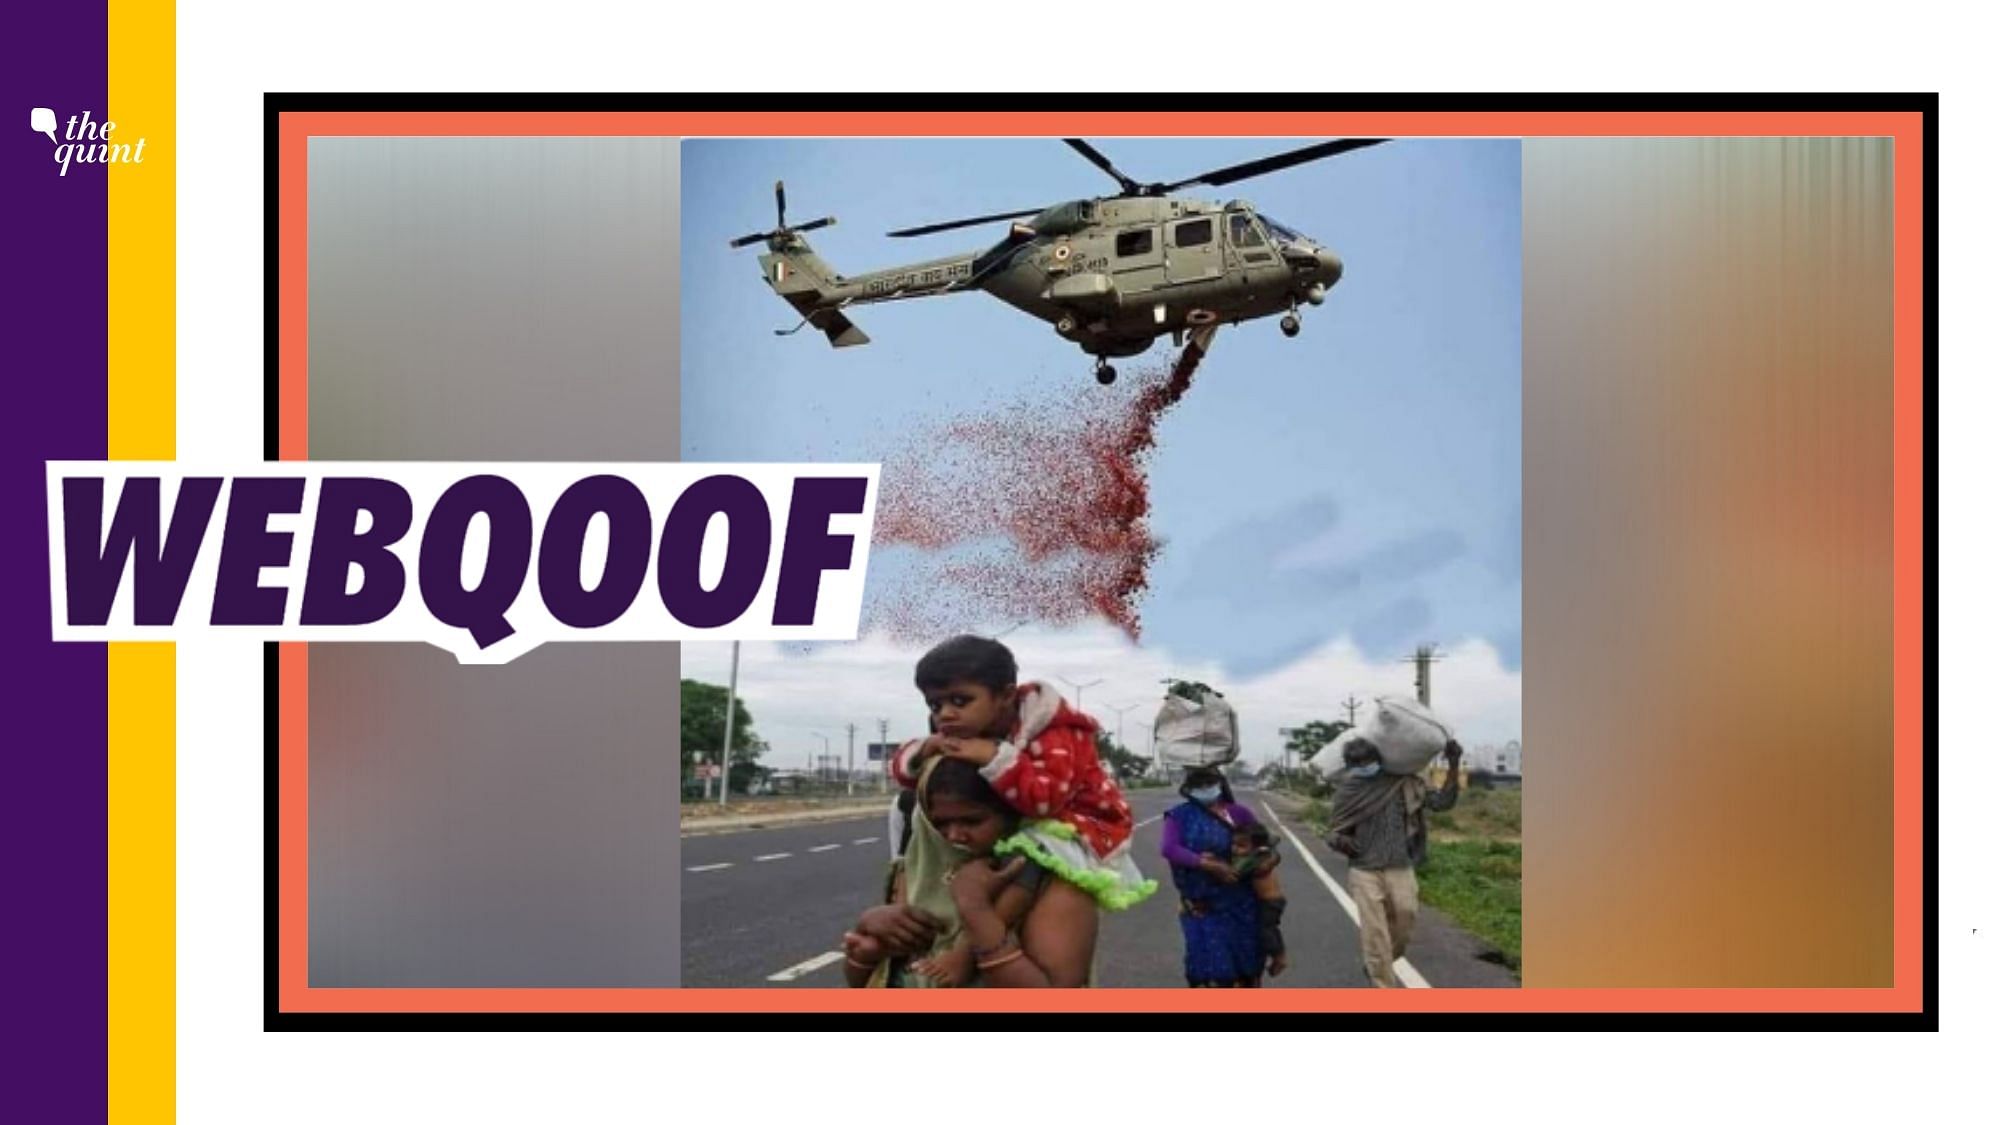 A viral image falsely claimed that IAF helicopters showered flower petals on migrant workers.